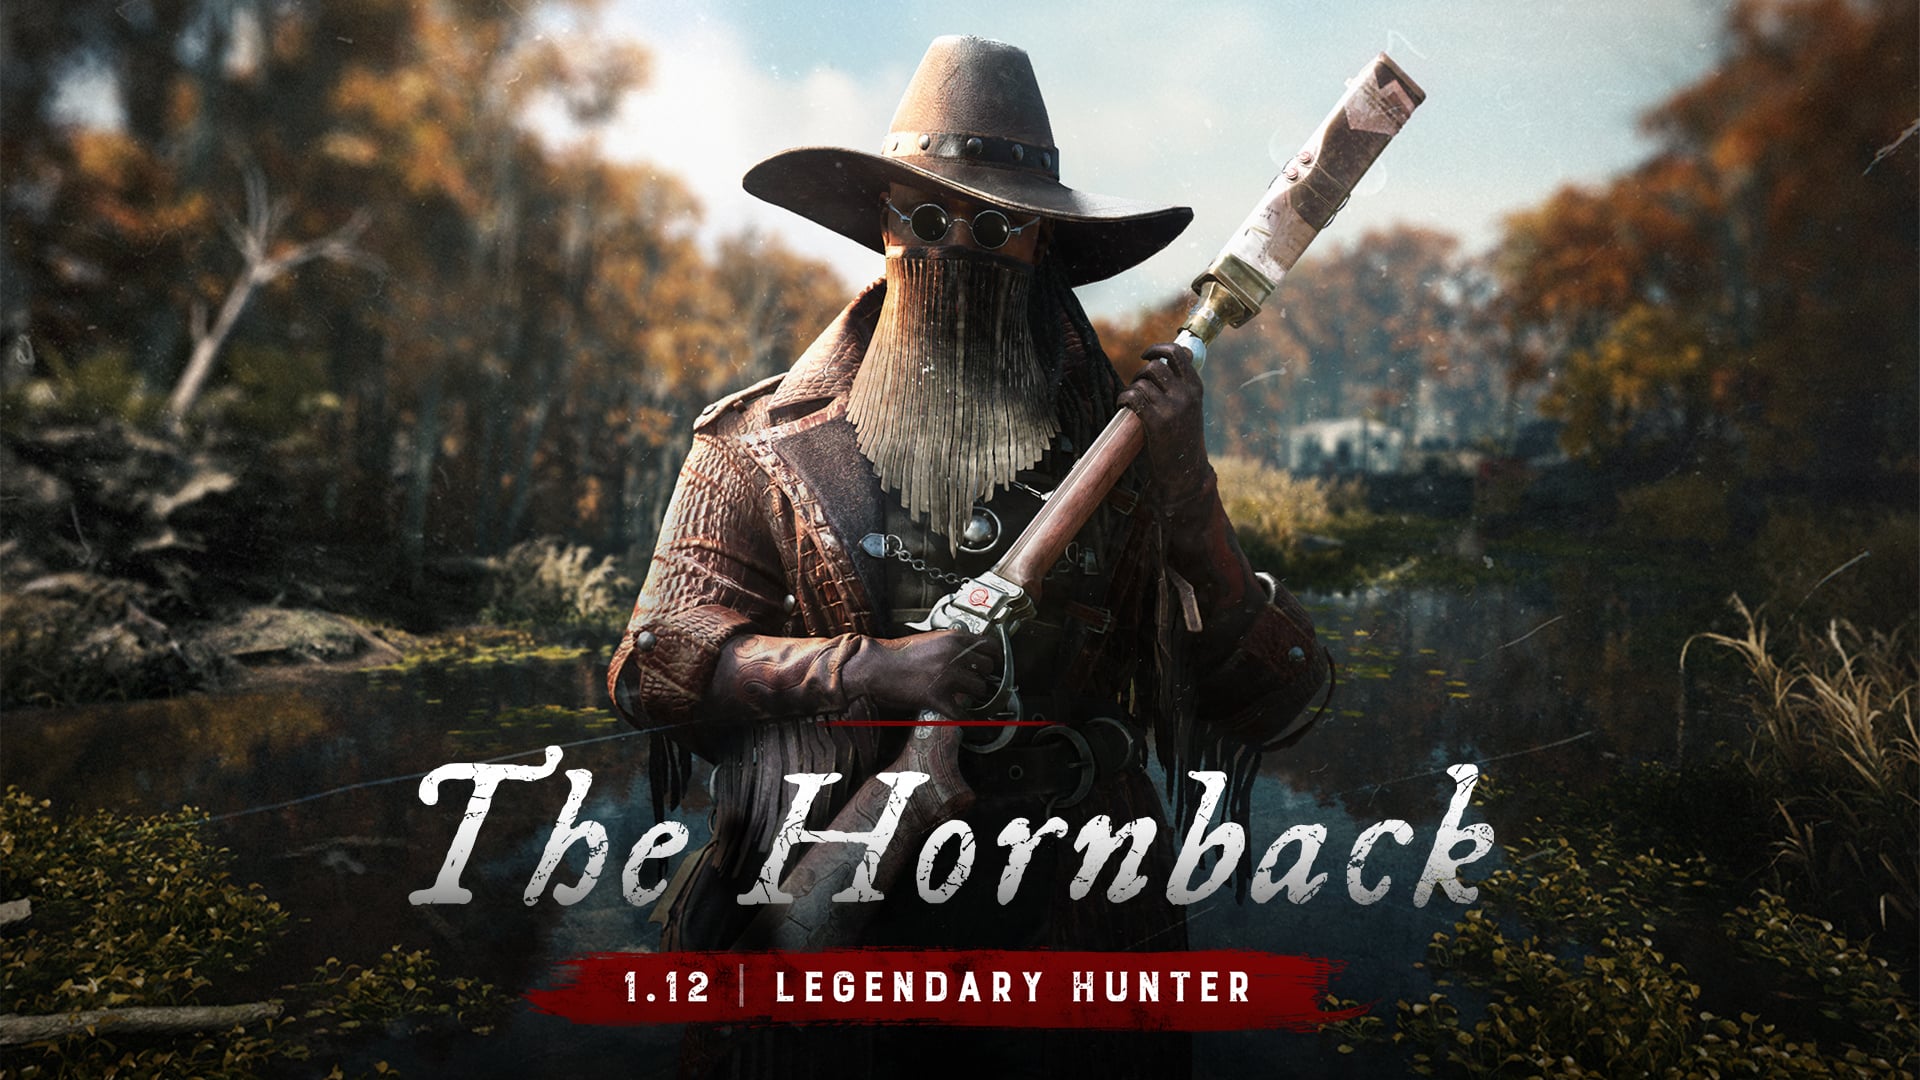 Way of the Hunter Update 1.000.030 Skins Out This Dec. 12 - MP1st